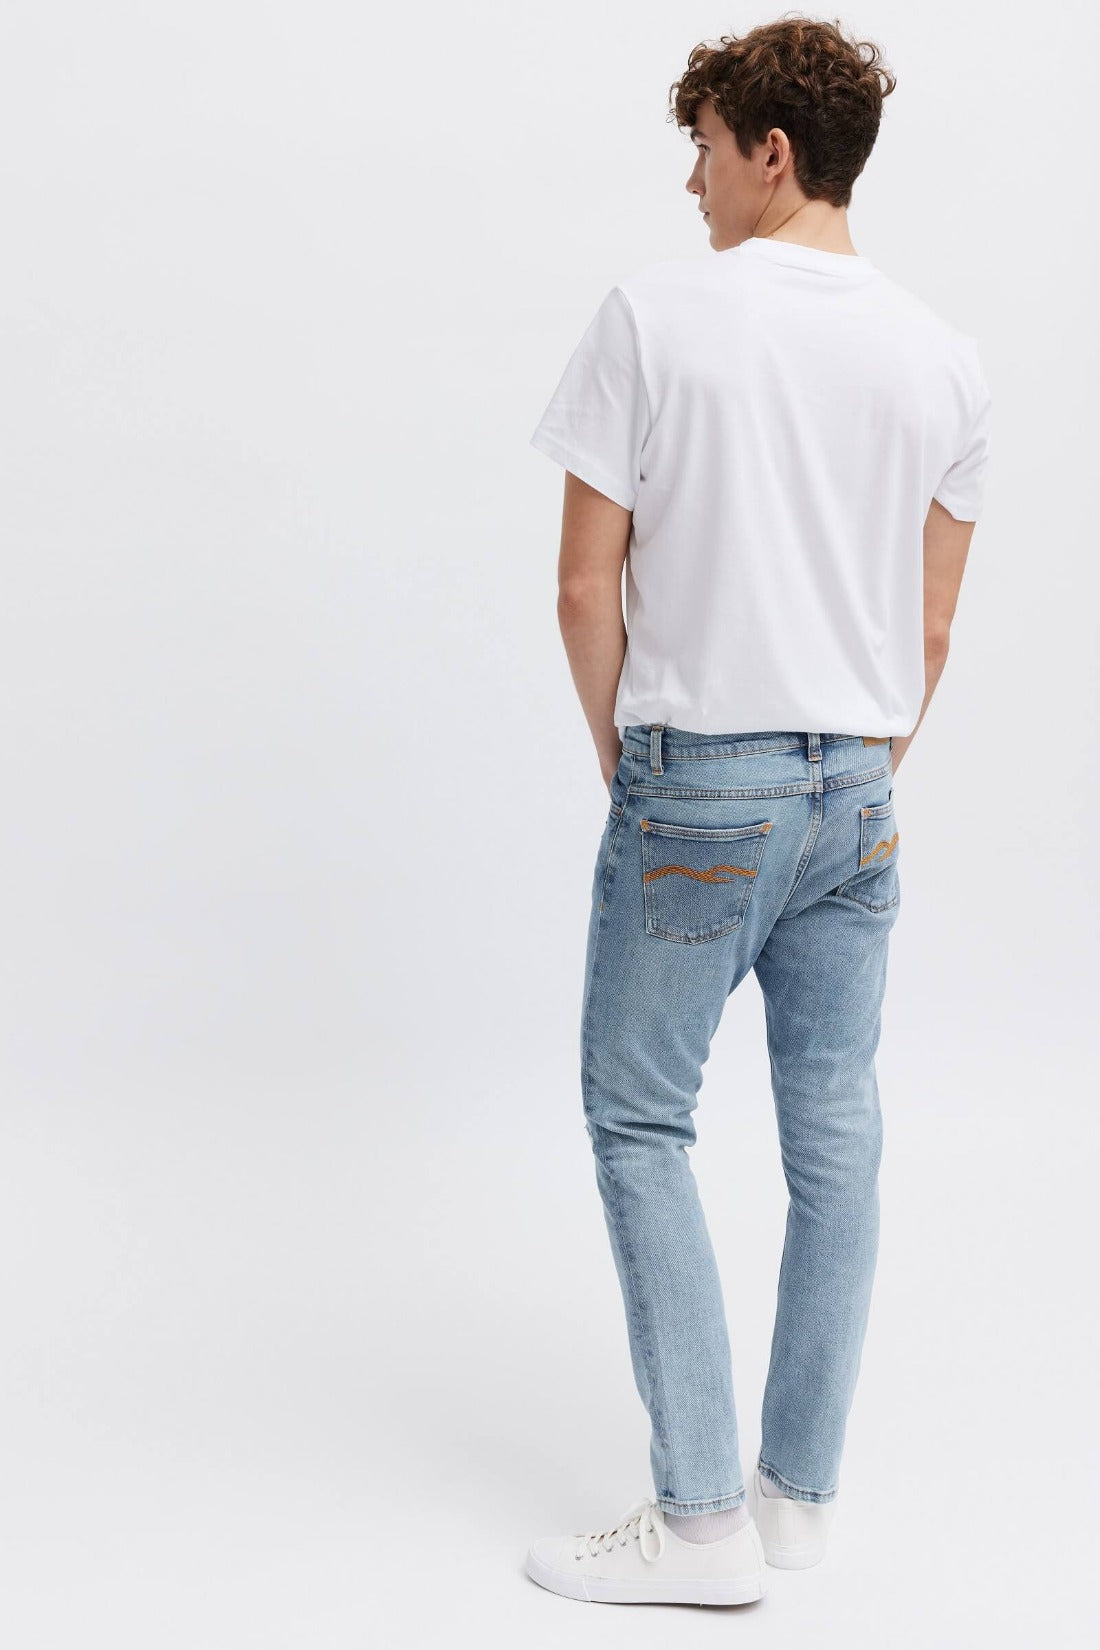 modern style, slim fit jeans for men 